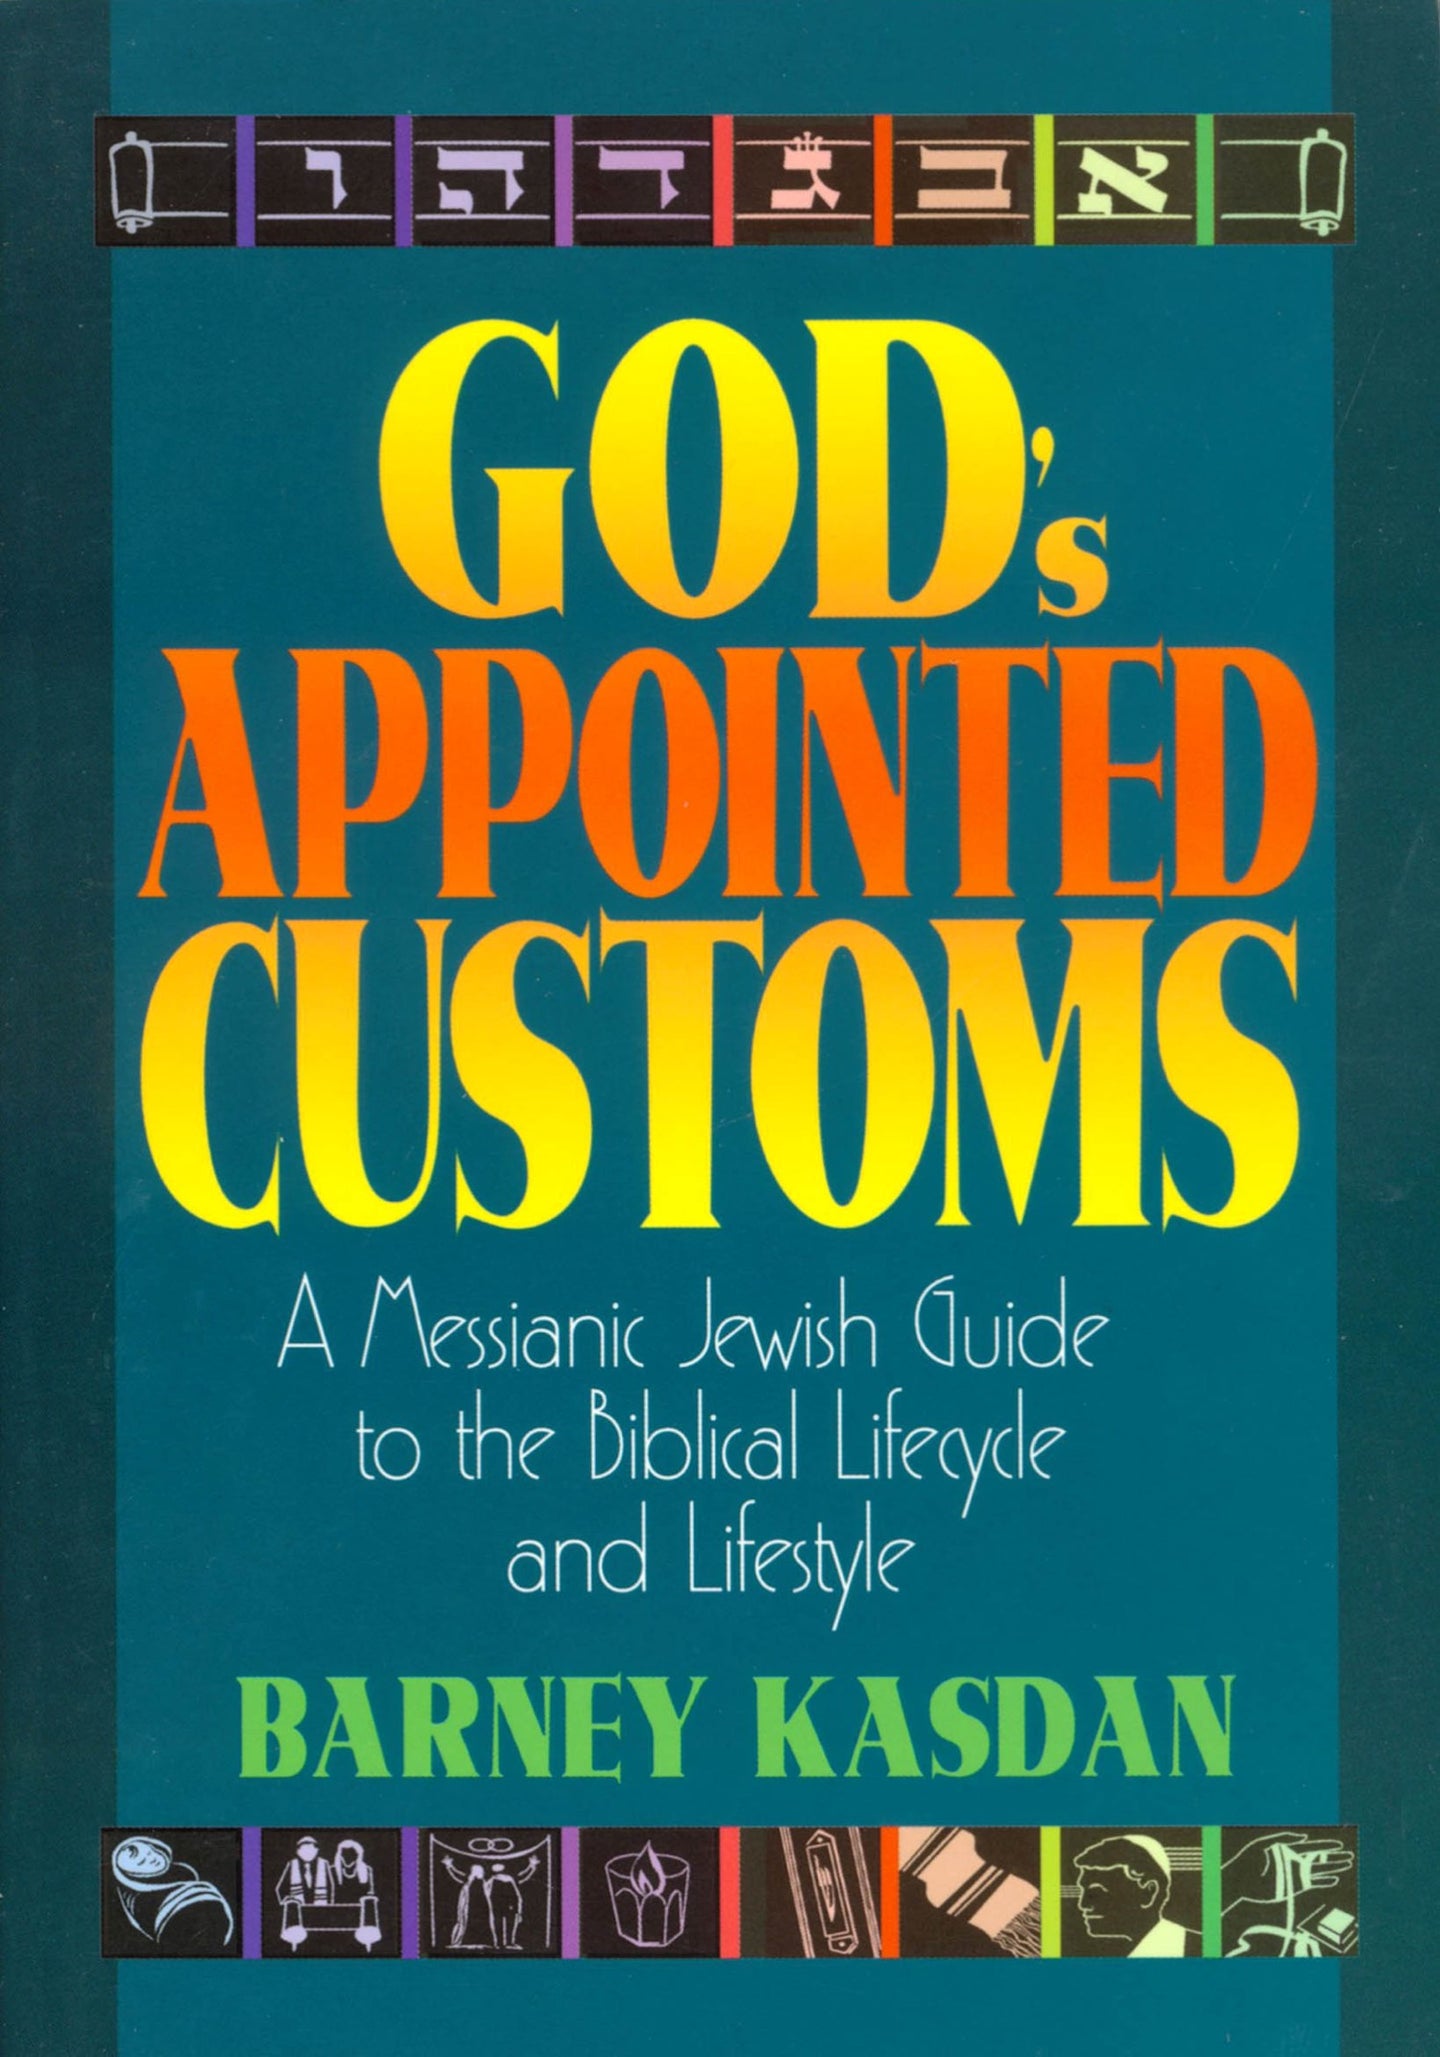 God's Appointed Customs: A Messianic Jewish Guide to the Biblical Lifecycle and Lifestyle by Barney Kasdan